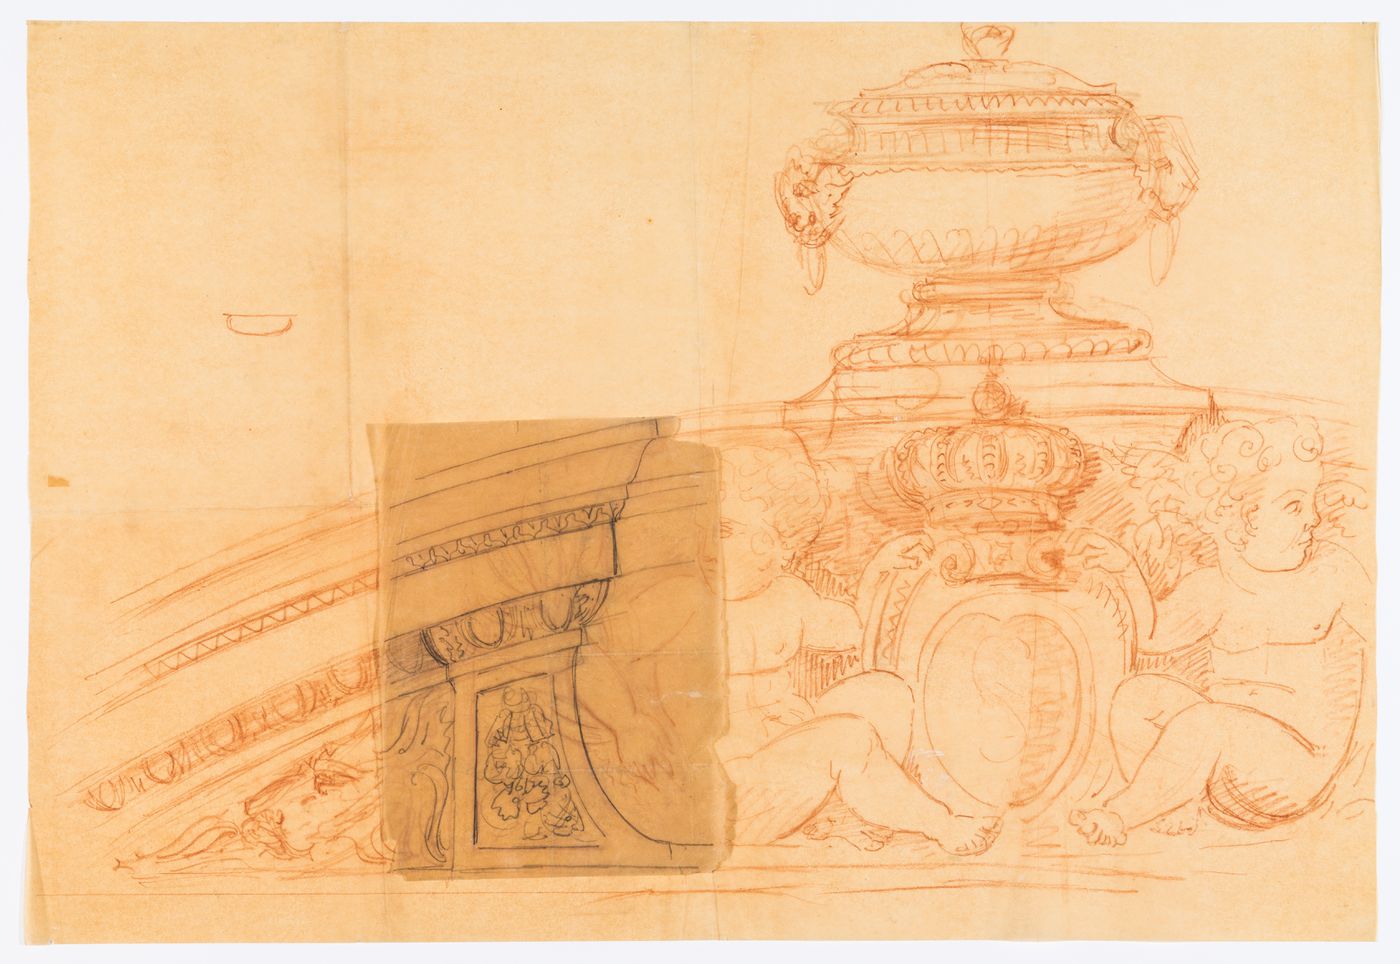 Full-scale detail for a pediment with cartouche and urn, possibly for Hôtel Soltykoff